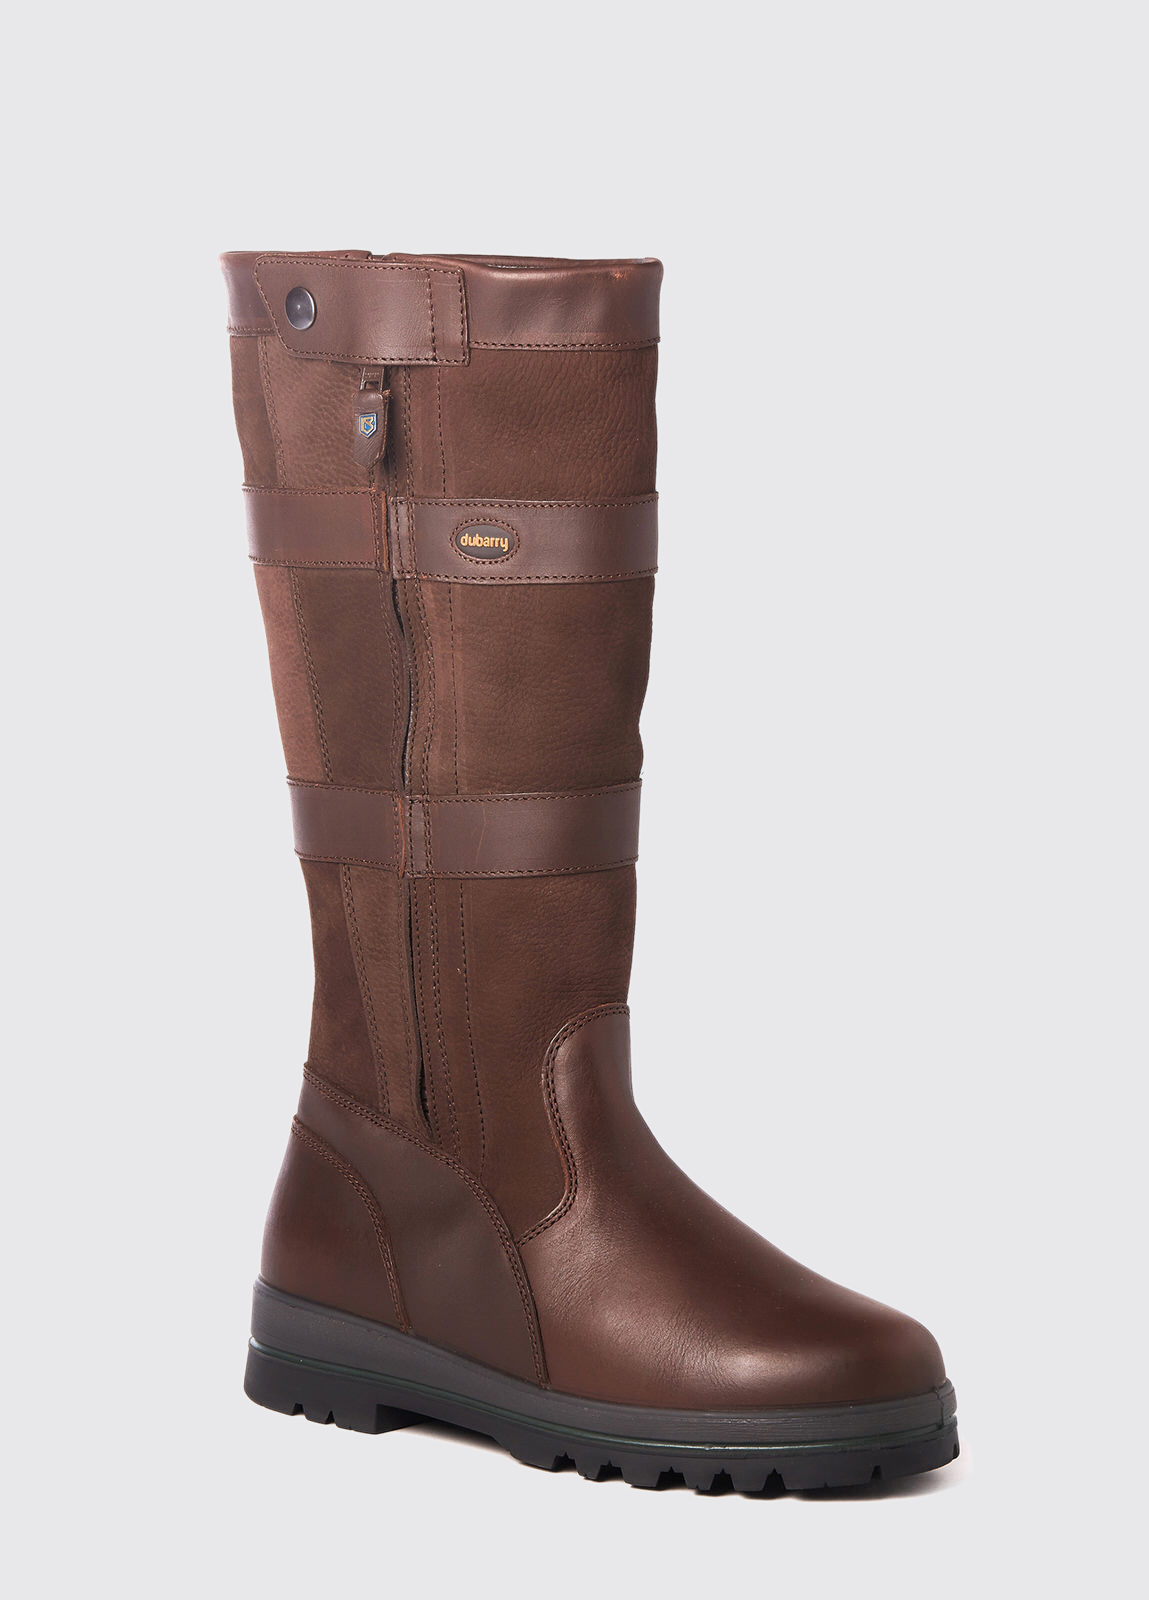 Wexford Java Country Boots | Dubarry USA